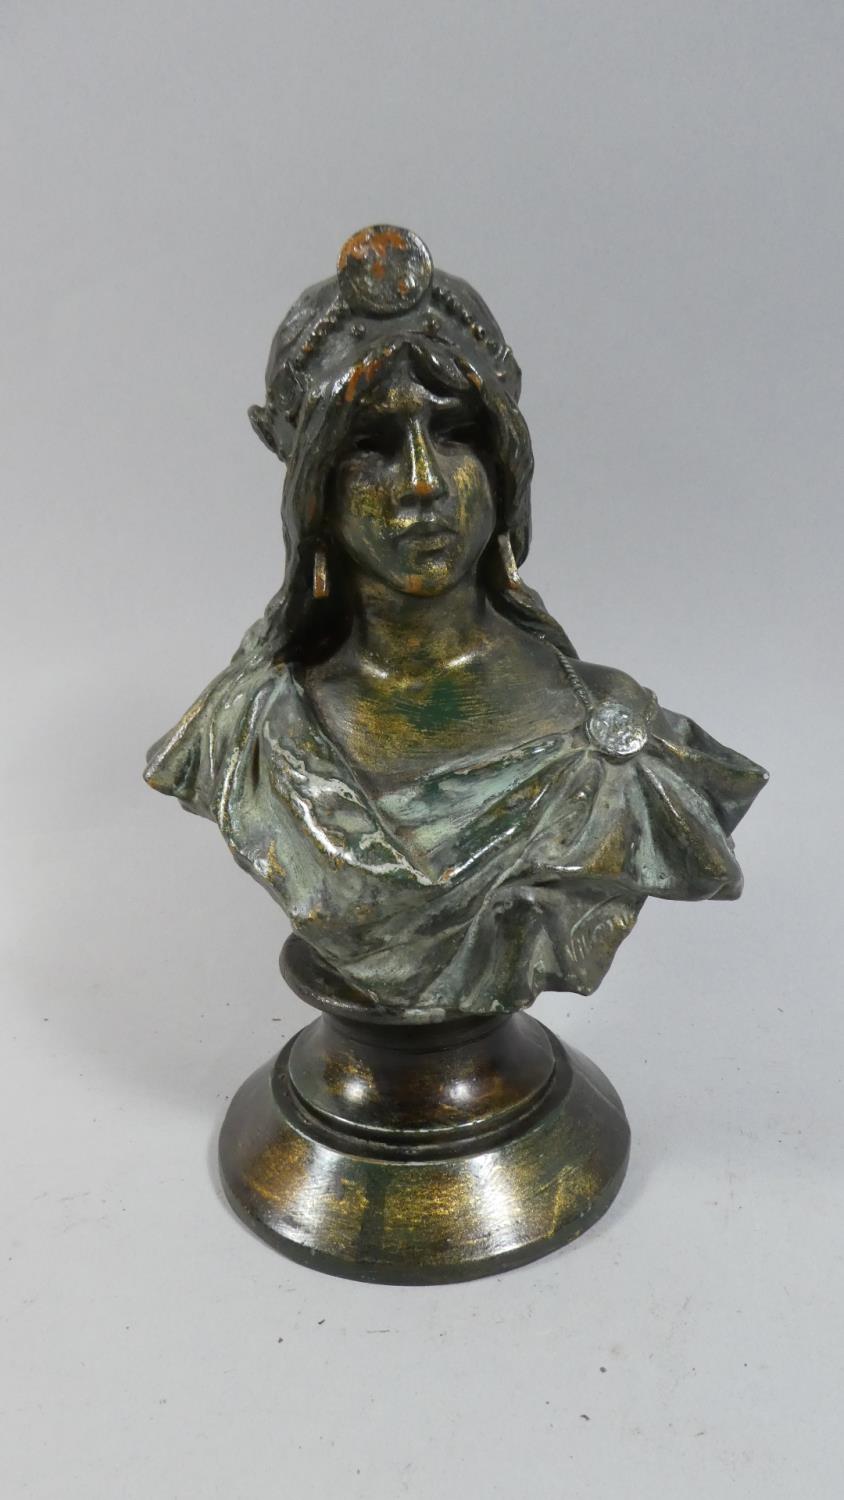 An Early 20th Century Continental Cold Painted Plaster Bust of Judith Signed Villanis (Emmanuel